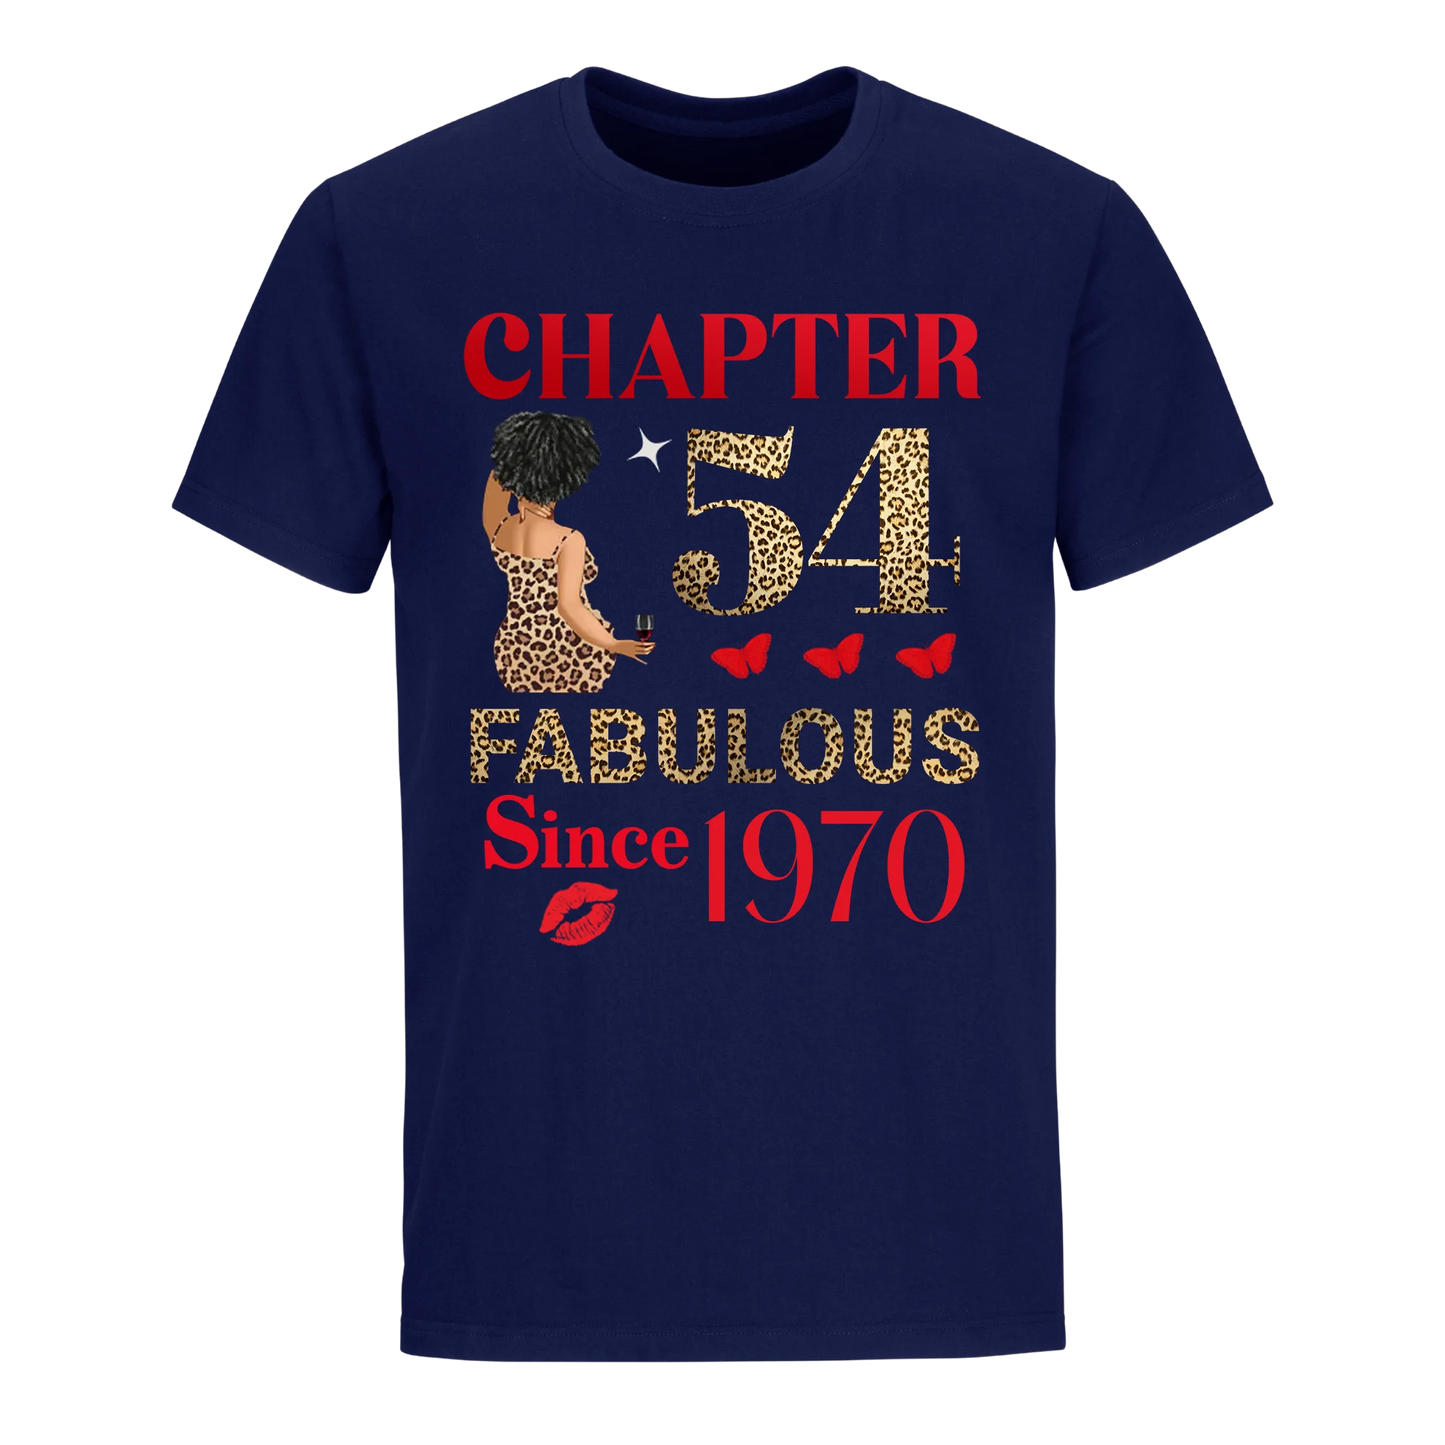 CHAPTER 54TH FAB SINCE 1970 UNISEX SHIRT